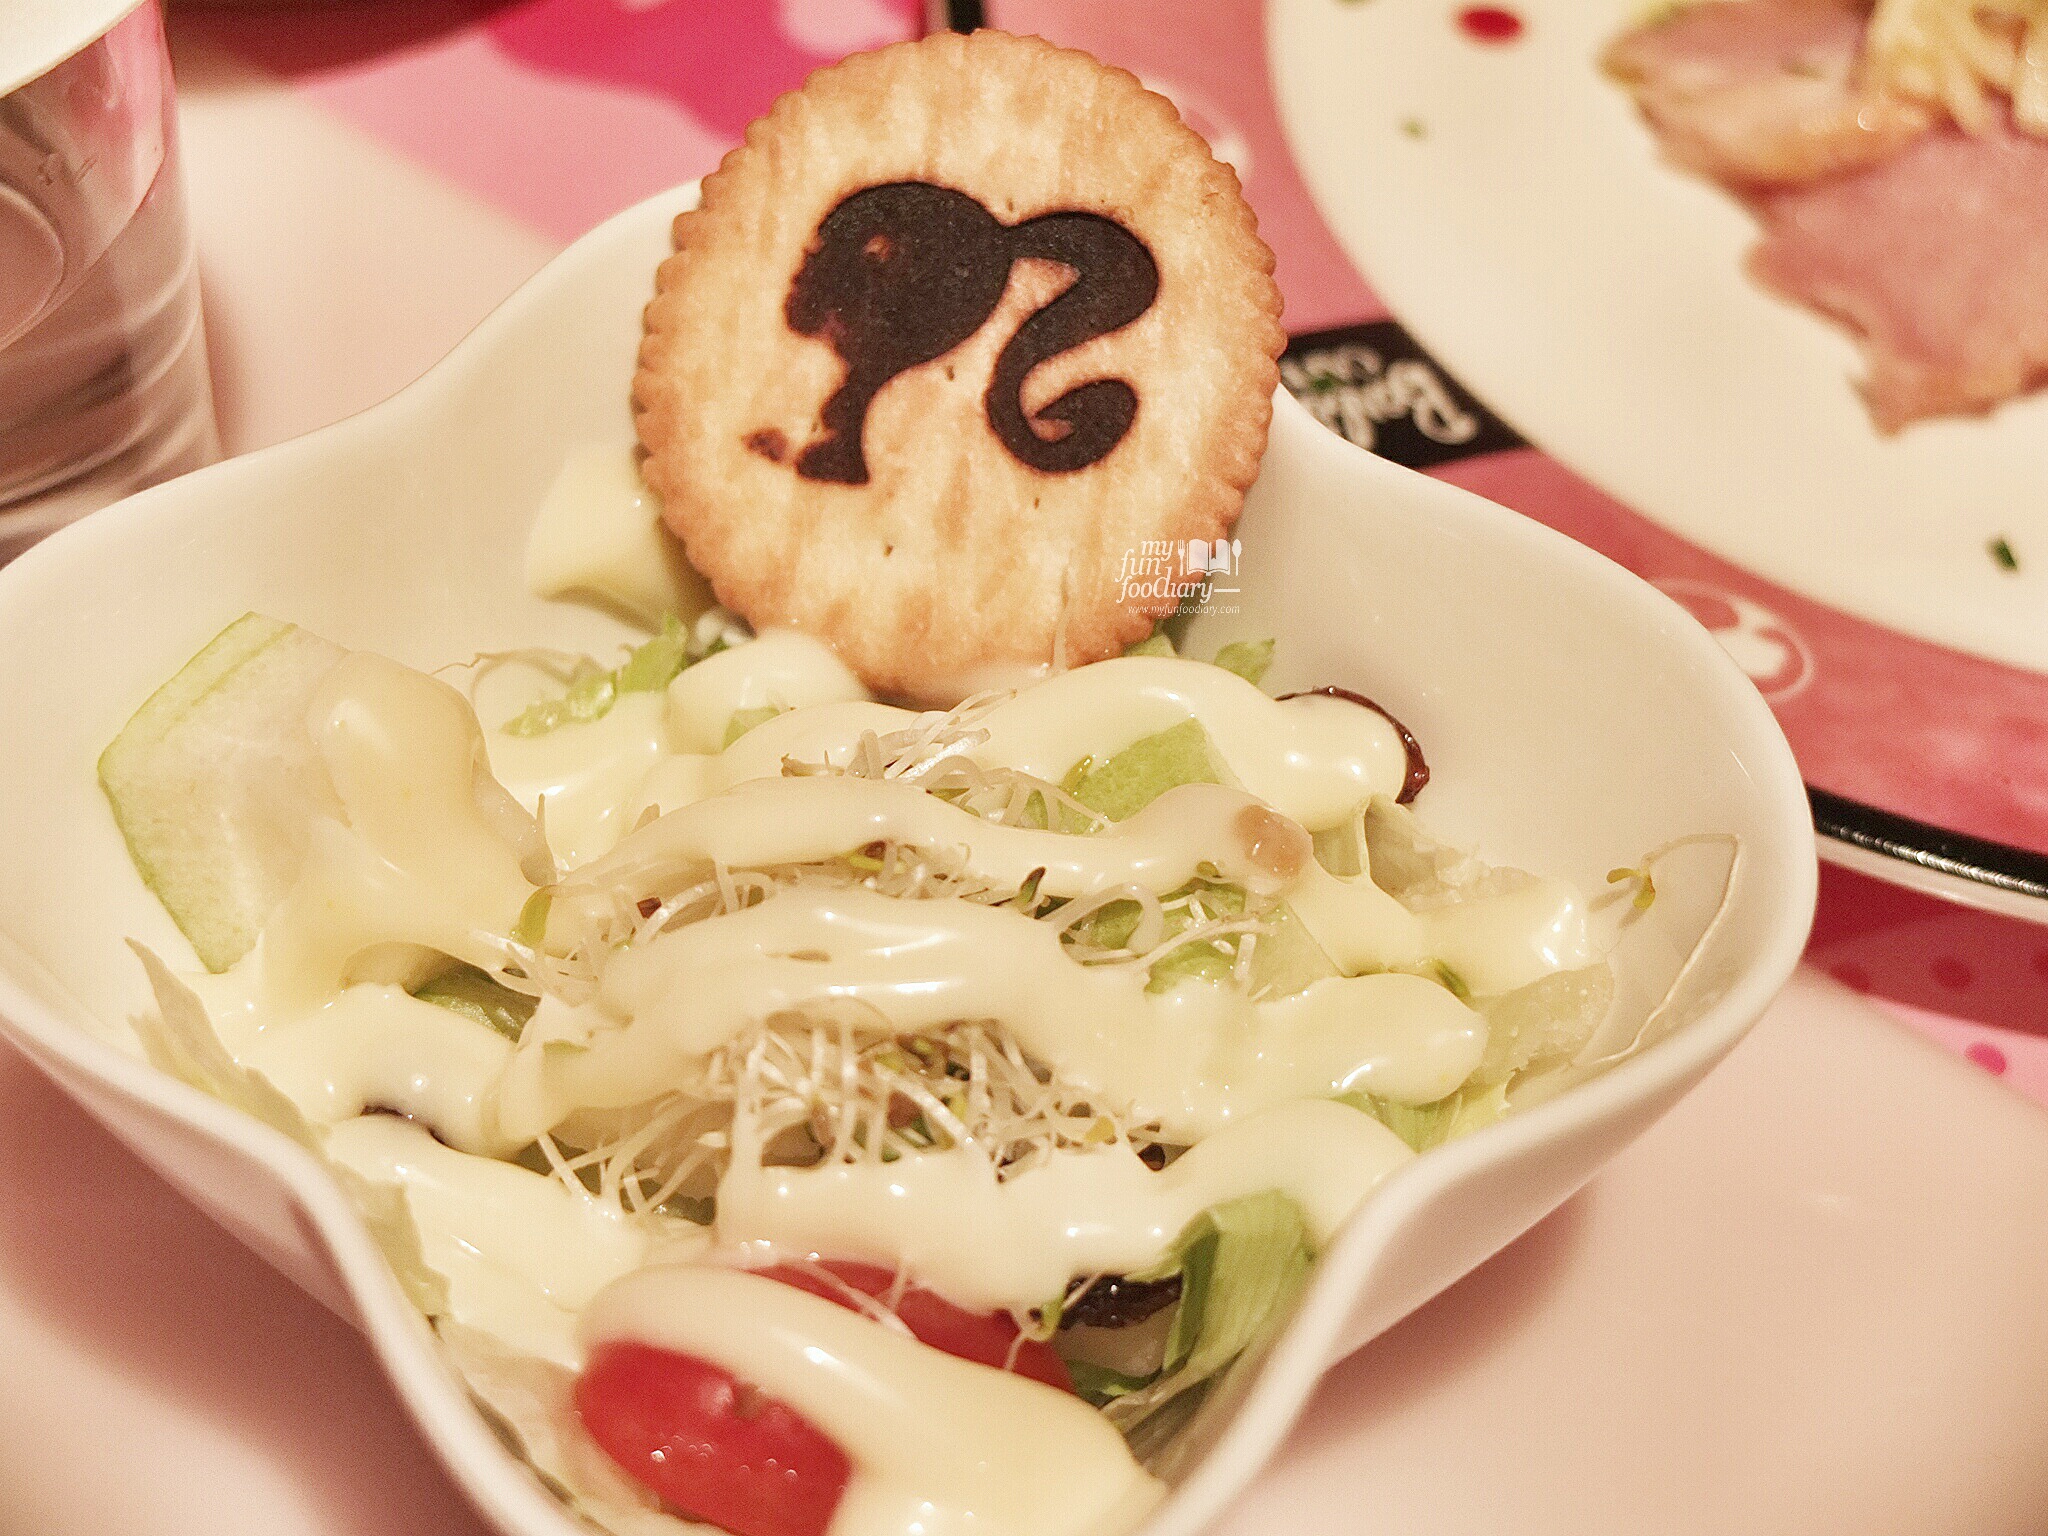 Fresh Salad at Barbie Cafe Taiwan by Myfunfoodiary